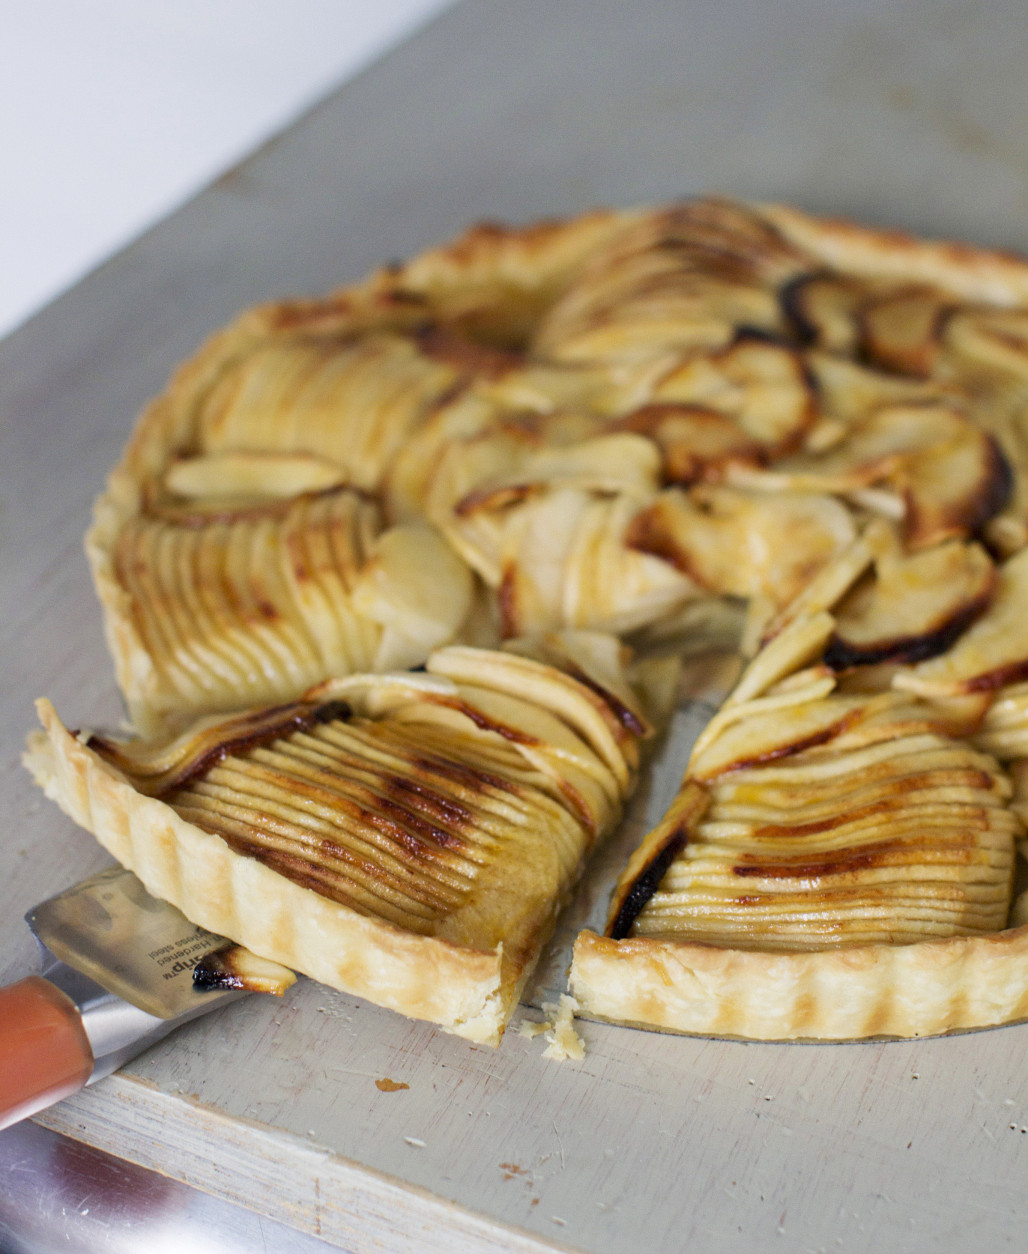 This Sept. 8, 2014 photo shows French apple tart in Concord, N.H. When slicing the apple stop each slice when youre still about 1/4 inch from the surface of the cutting board. According to chef Sara Moulton it is easier to slice an apple thinly when each slice remains attached at the bottom. (AP Photo/Matthew Mead)